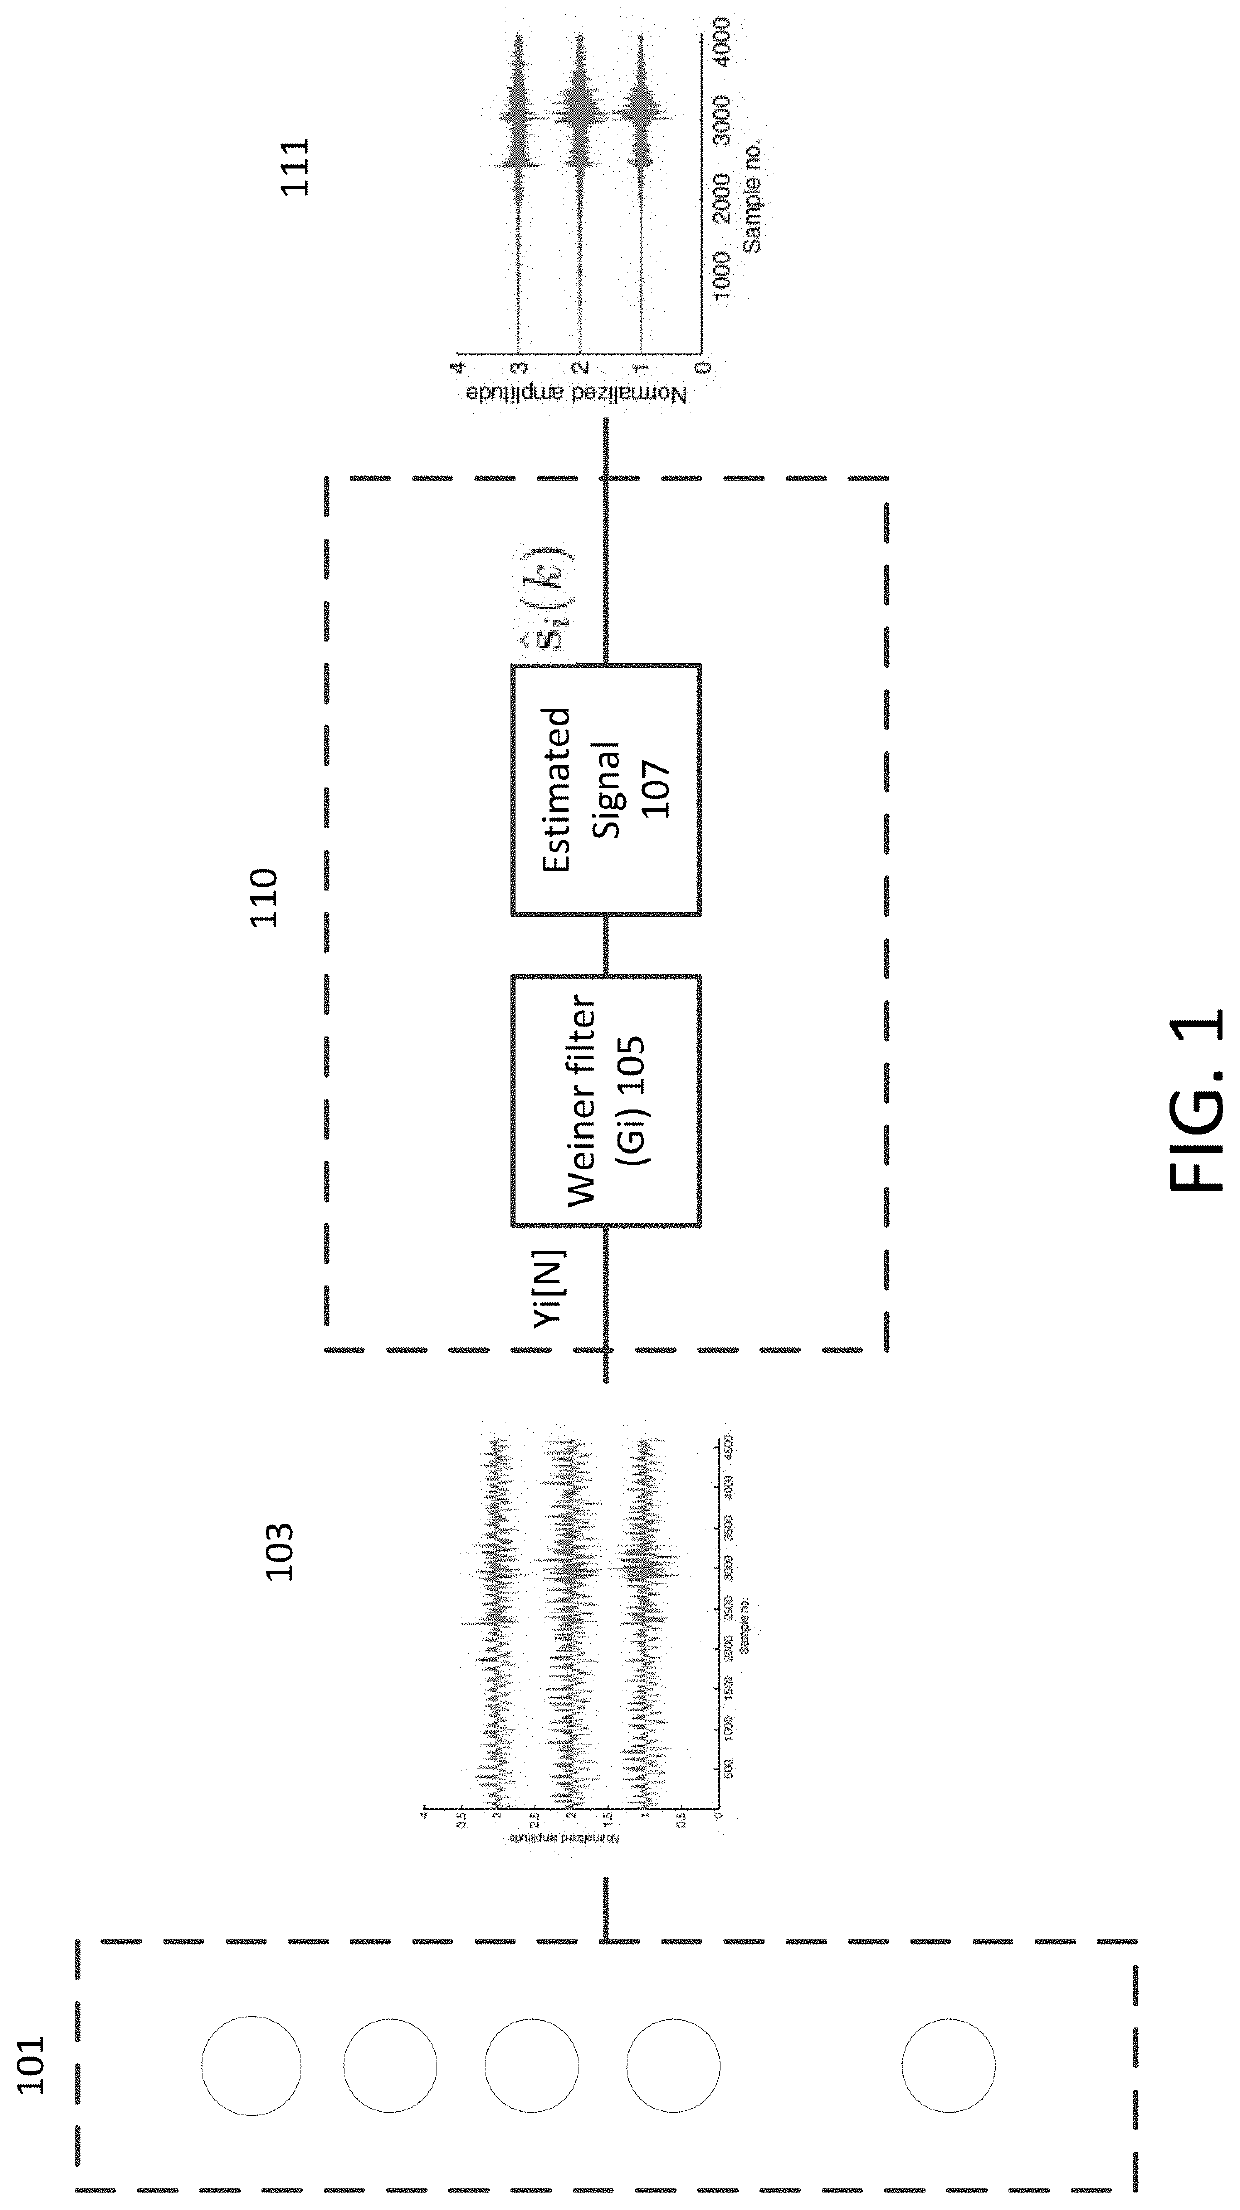 Adaptive noise estimation and removal method for microseismic data